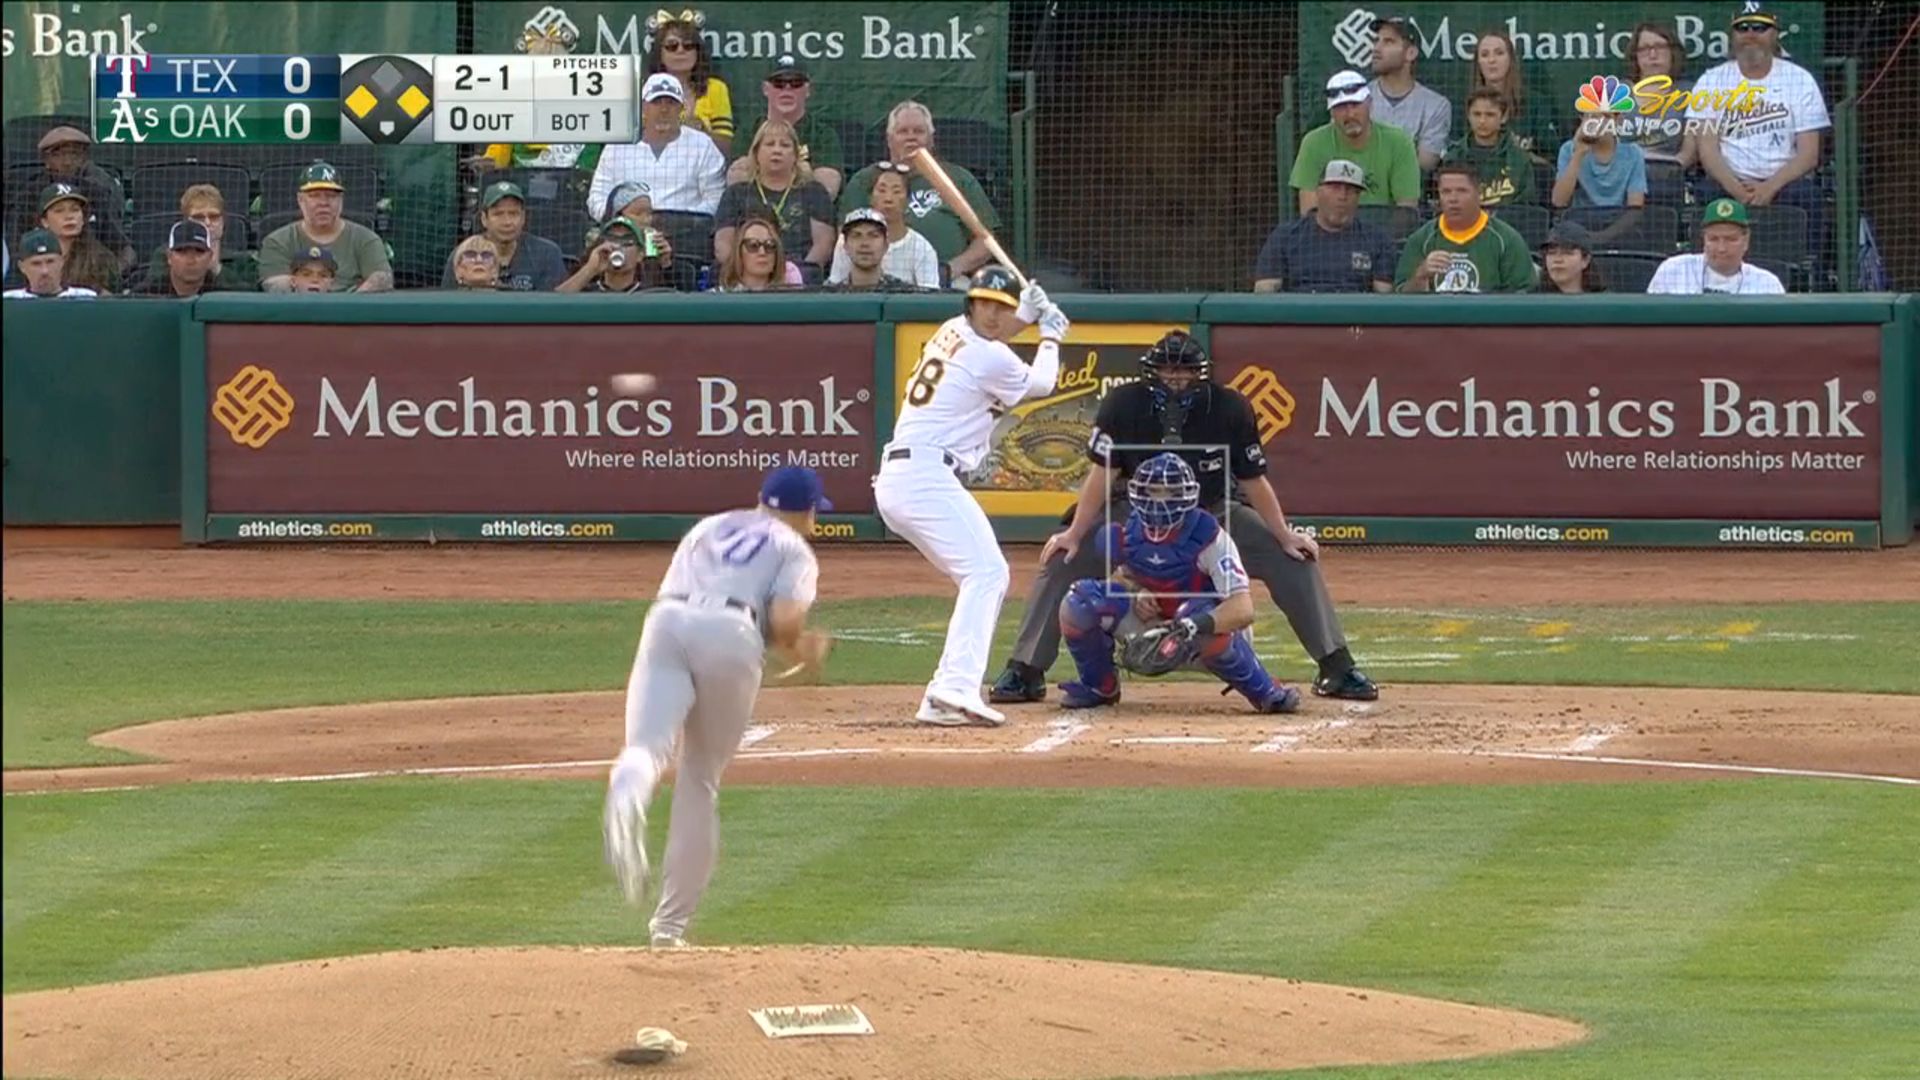 Oakland A's Game #43: A's hold on in Texas slugfest, win 10-6 over Rangers  - Athletics Nation